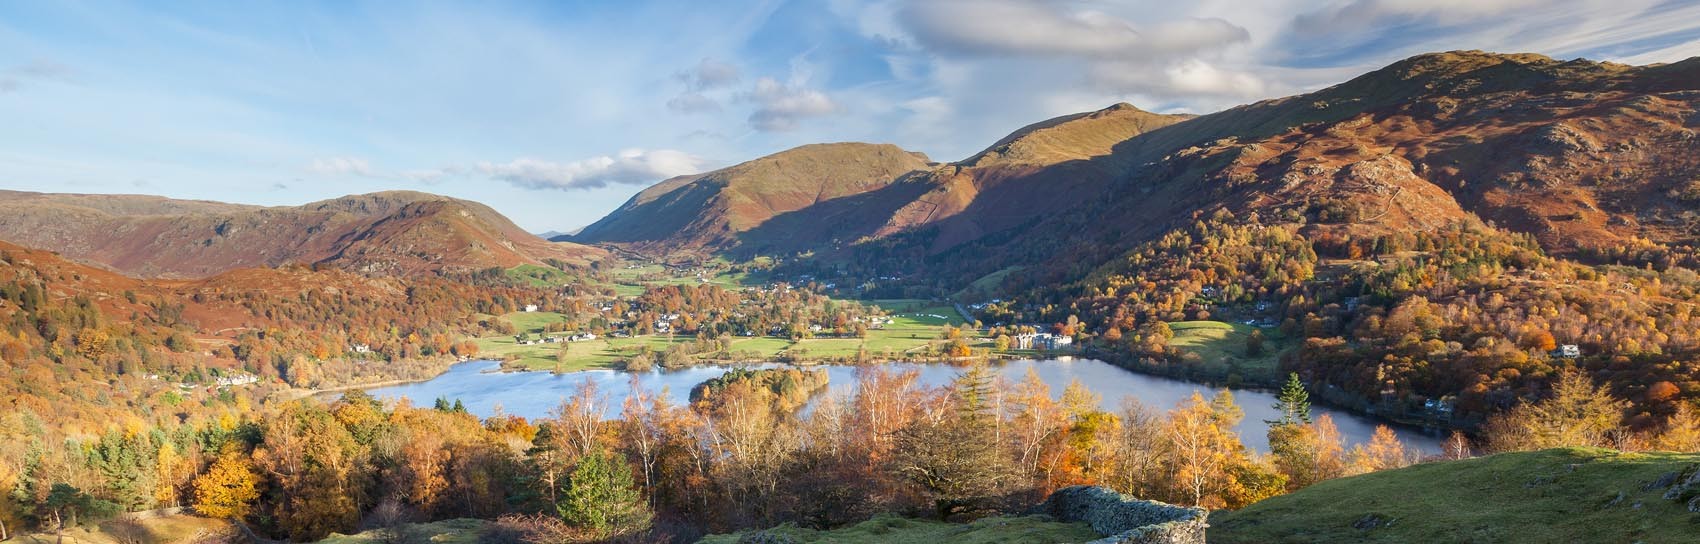 The view over Grasmere in the Lake District. Photograph by JAMES LINDSAY